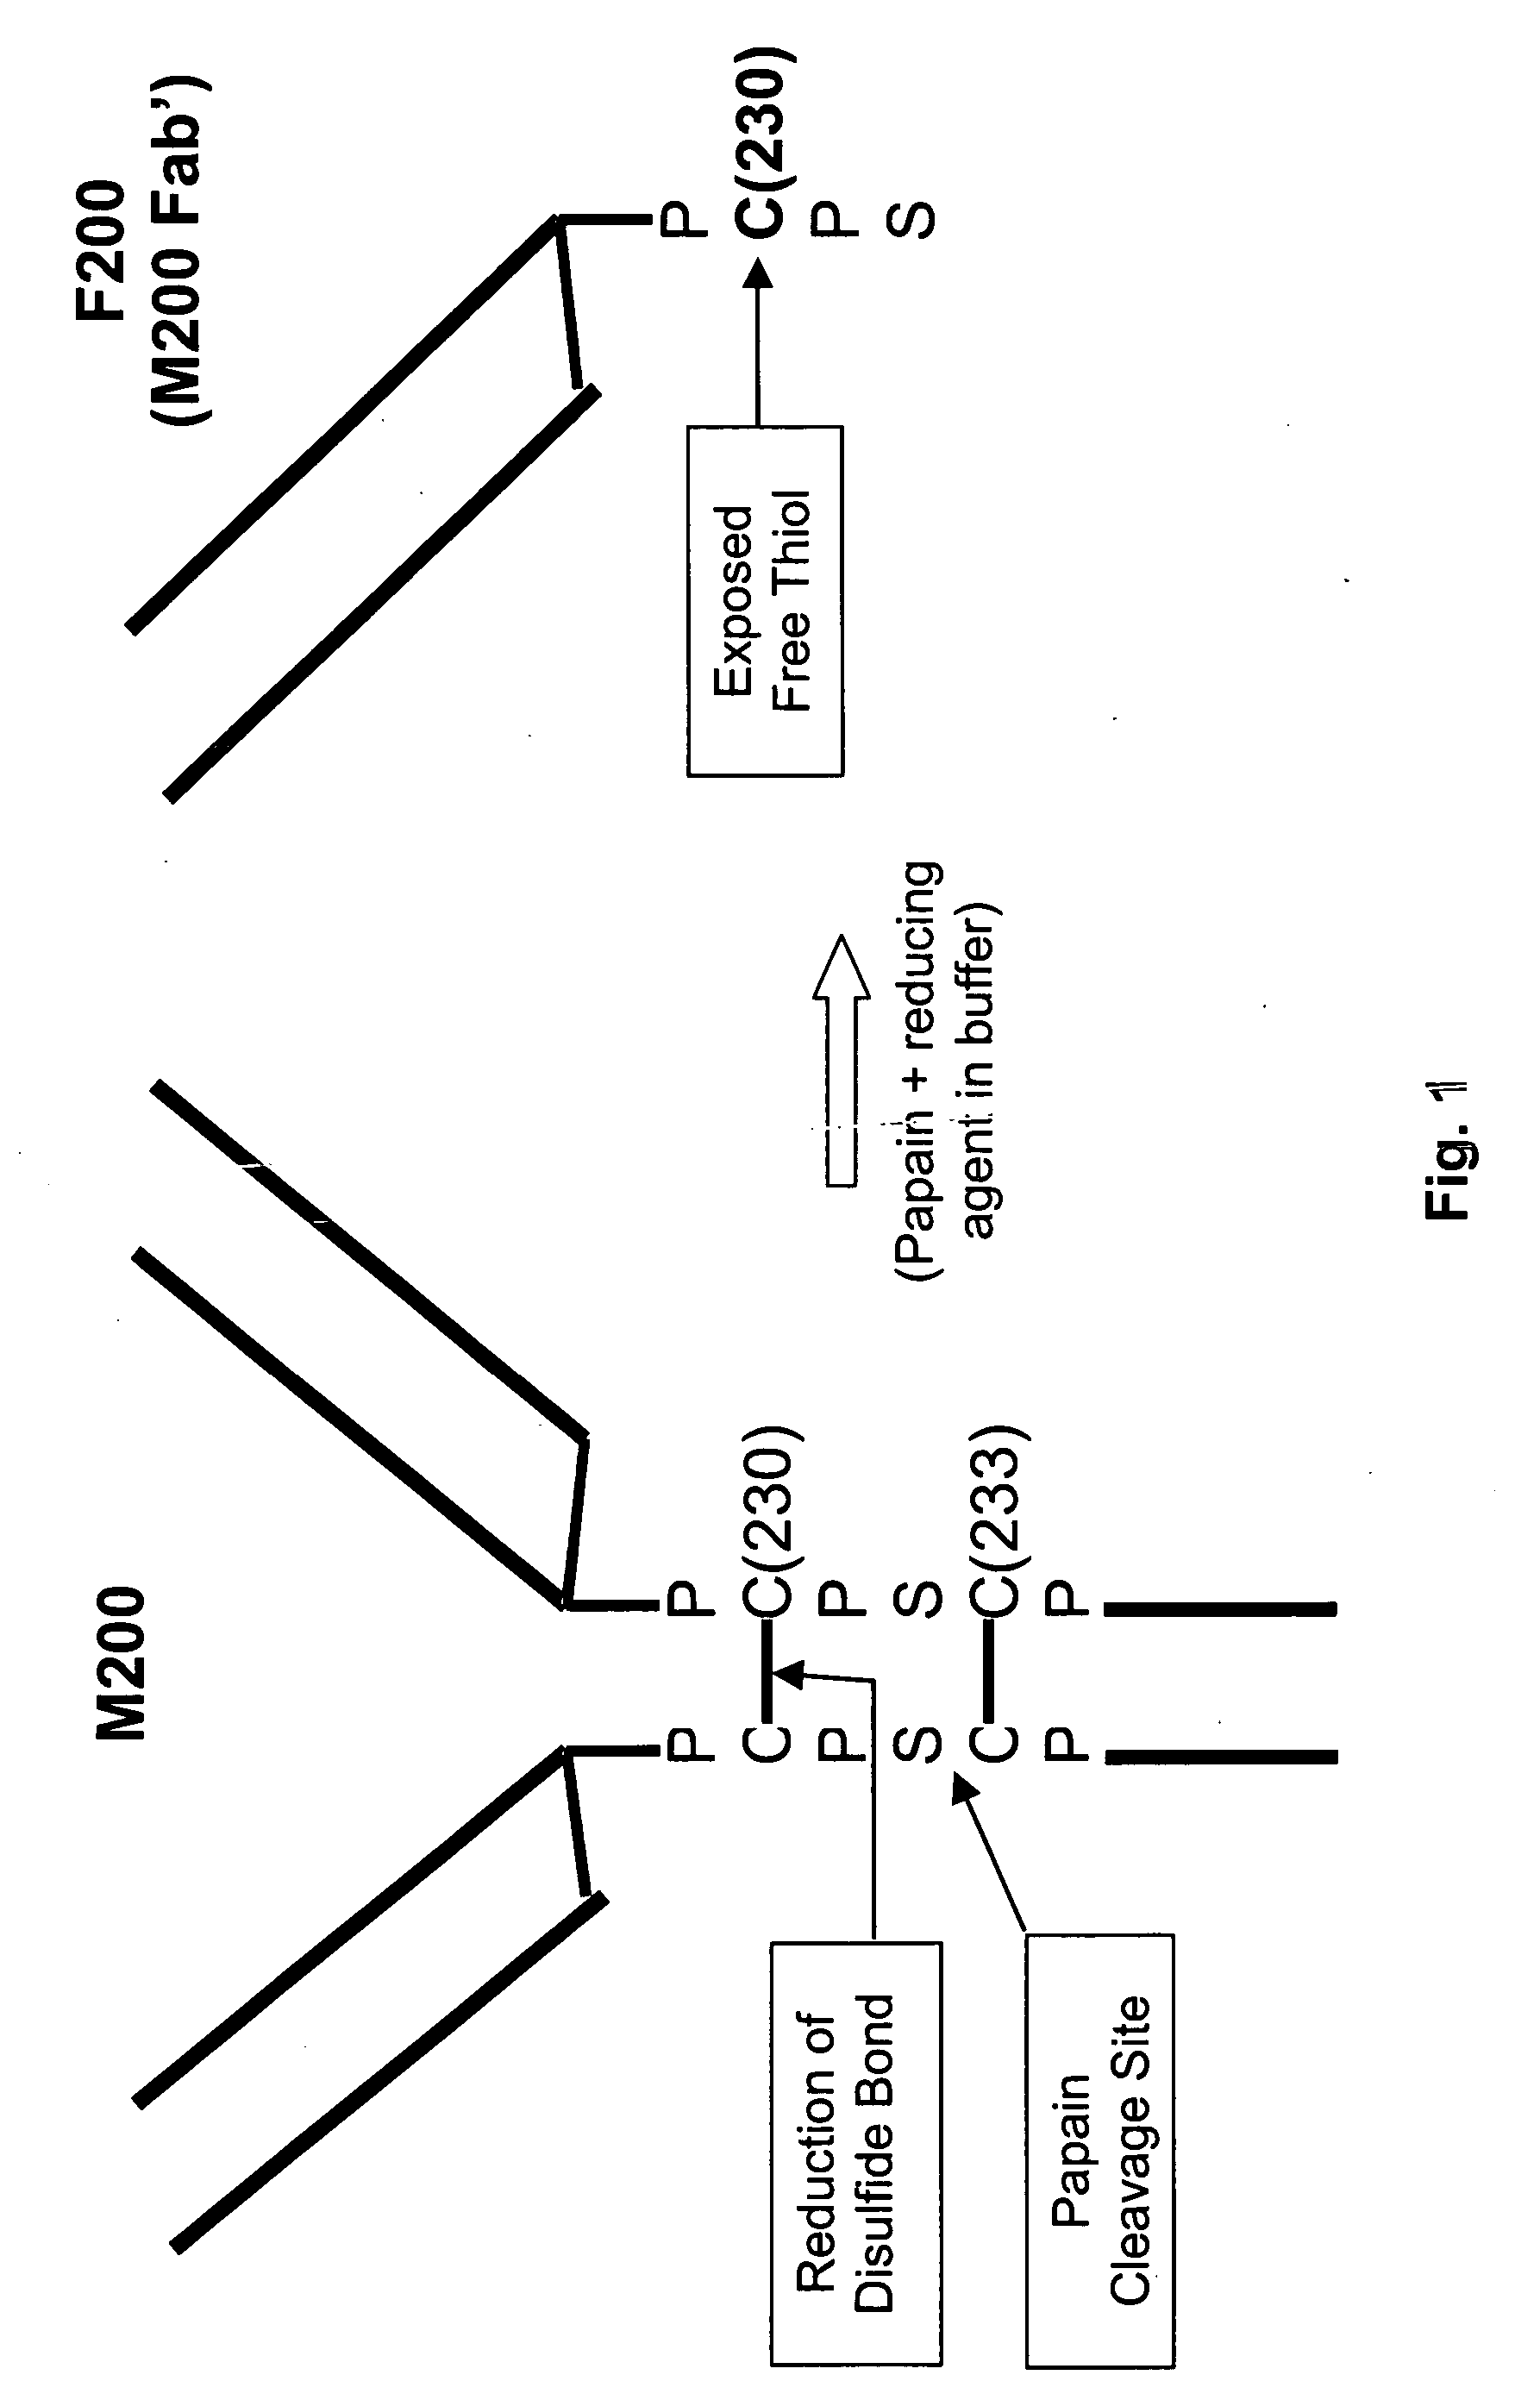 Stable liquid and lyophilized formulation of proteins